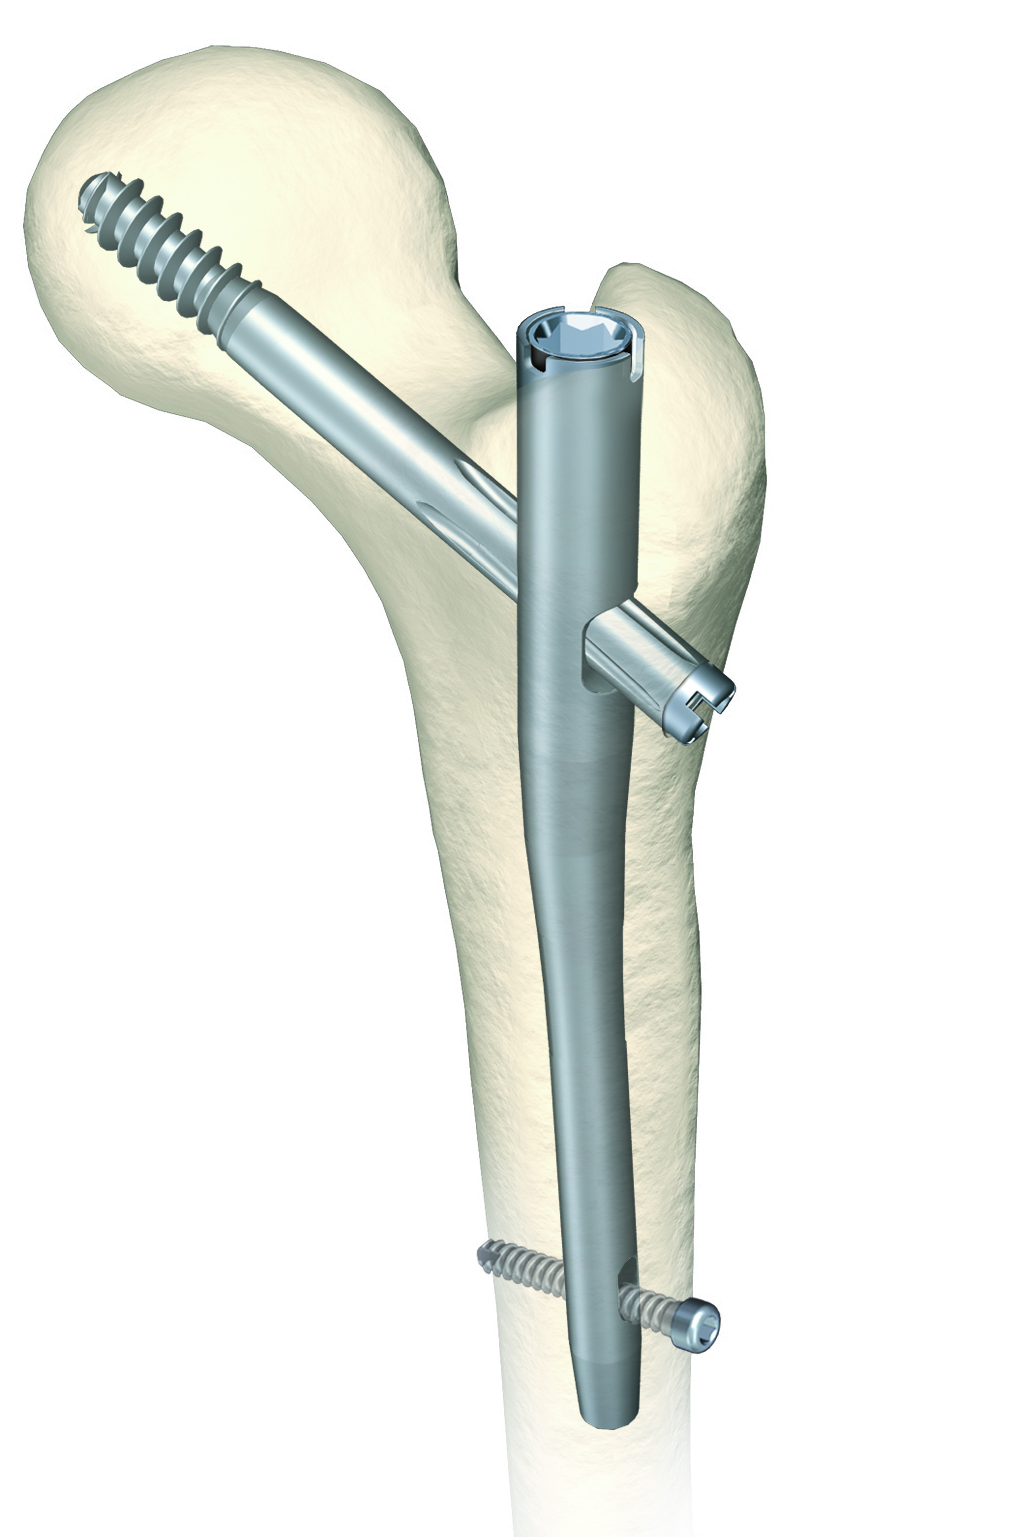 smith and nephew hip replacement technique guide